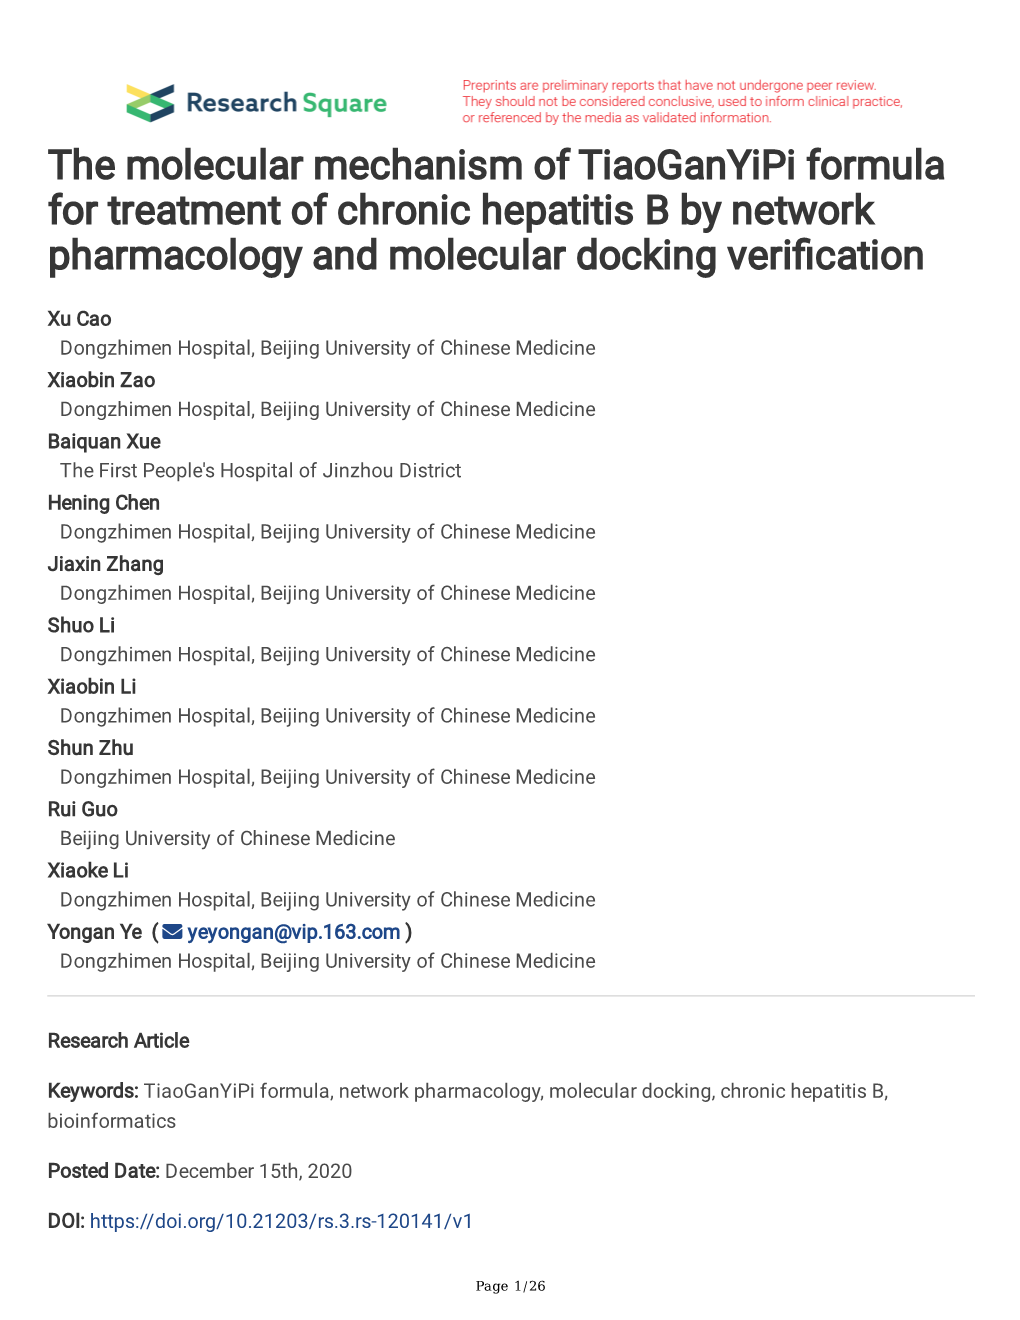 The Molecular Mechanism of Tiaoganyipi Formula for Treatment of Chronic Hepatitis B by Network Pharmacology and Molecular Docking Verifcation